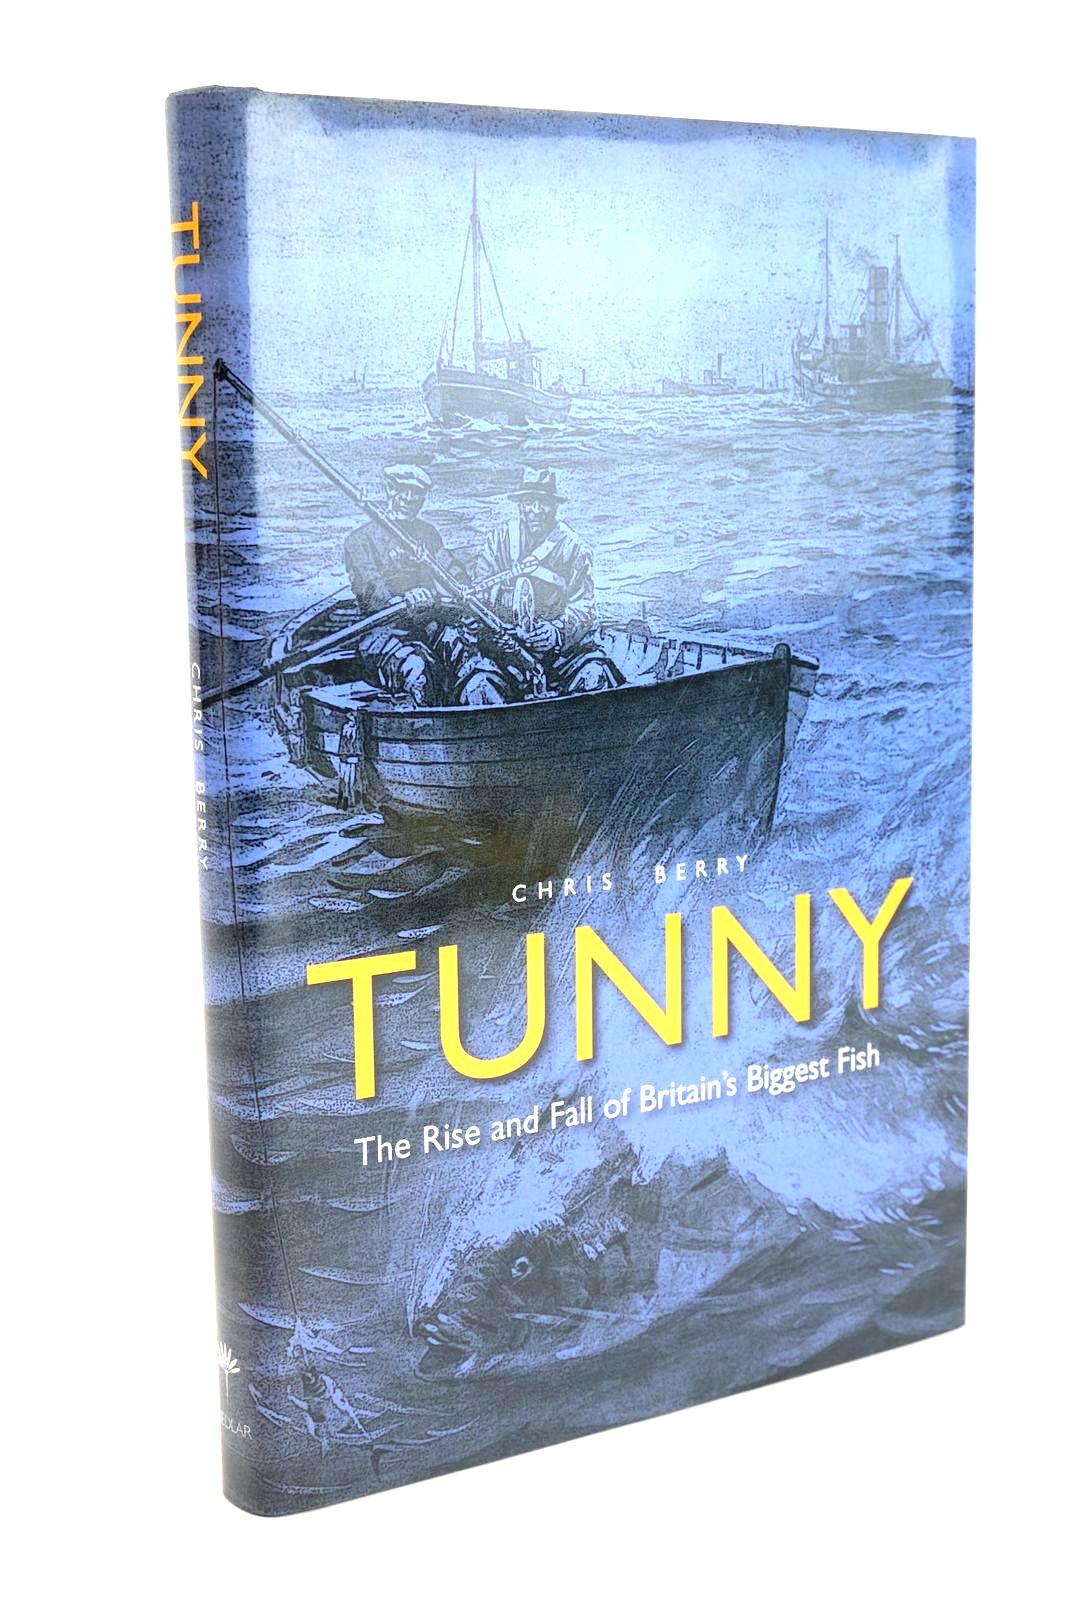 Photo of TUNNY: THE RISE AND FALL OF BRITAIN'S BIGGEST FISH- Stock Number: 1326731